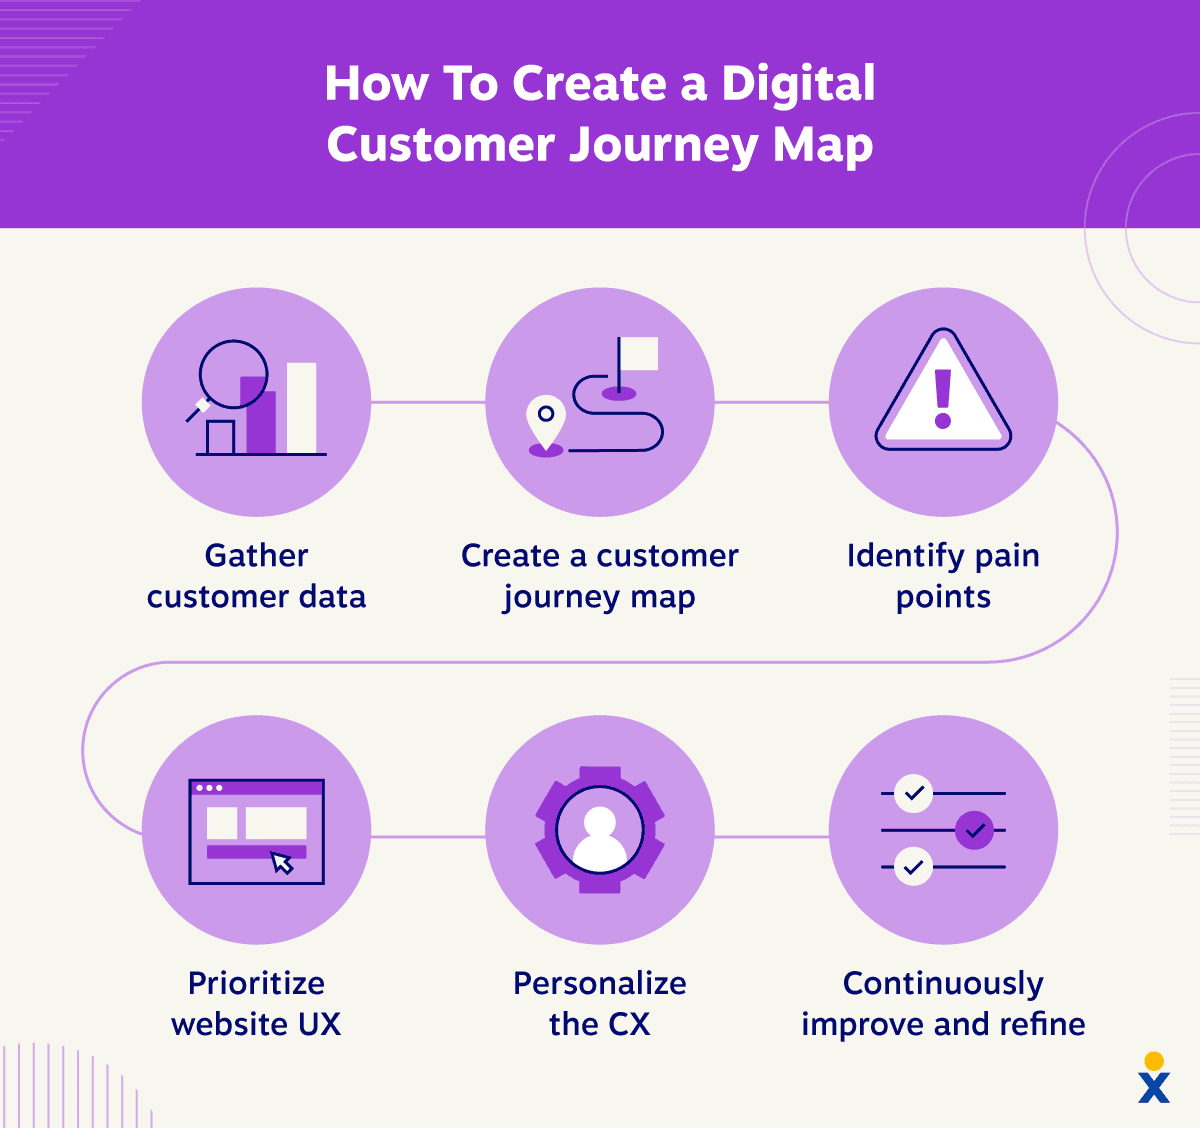 A flow chart showing the steps of creating a digital customer journey map.